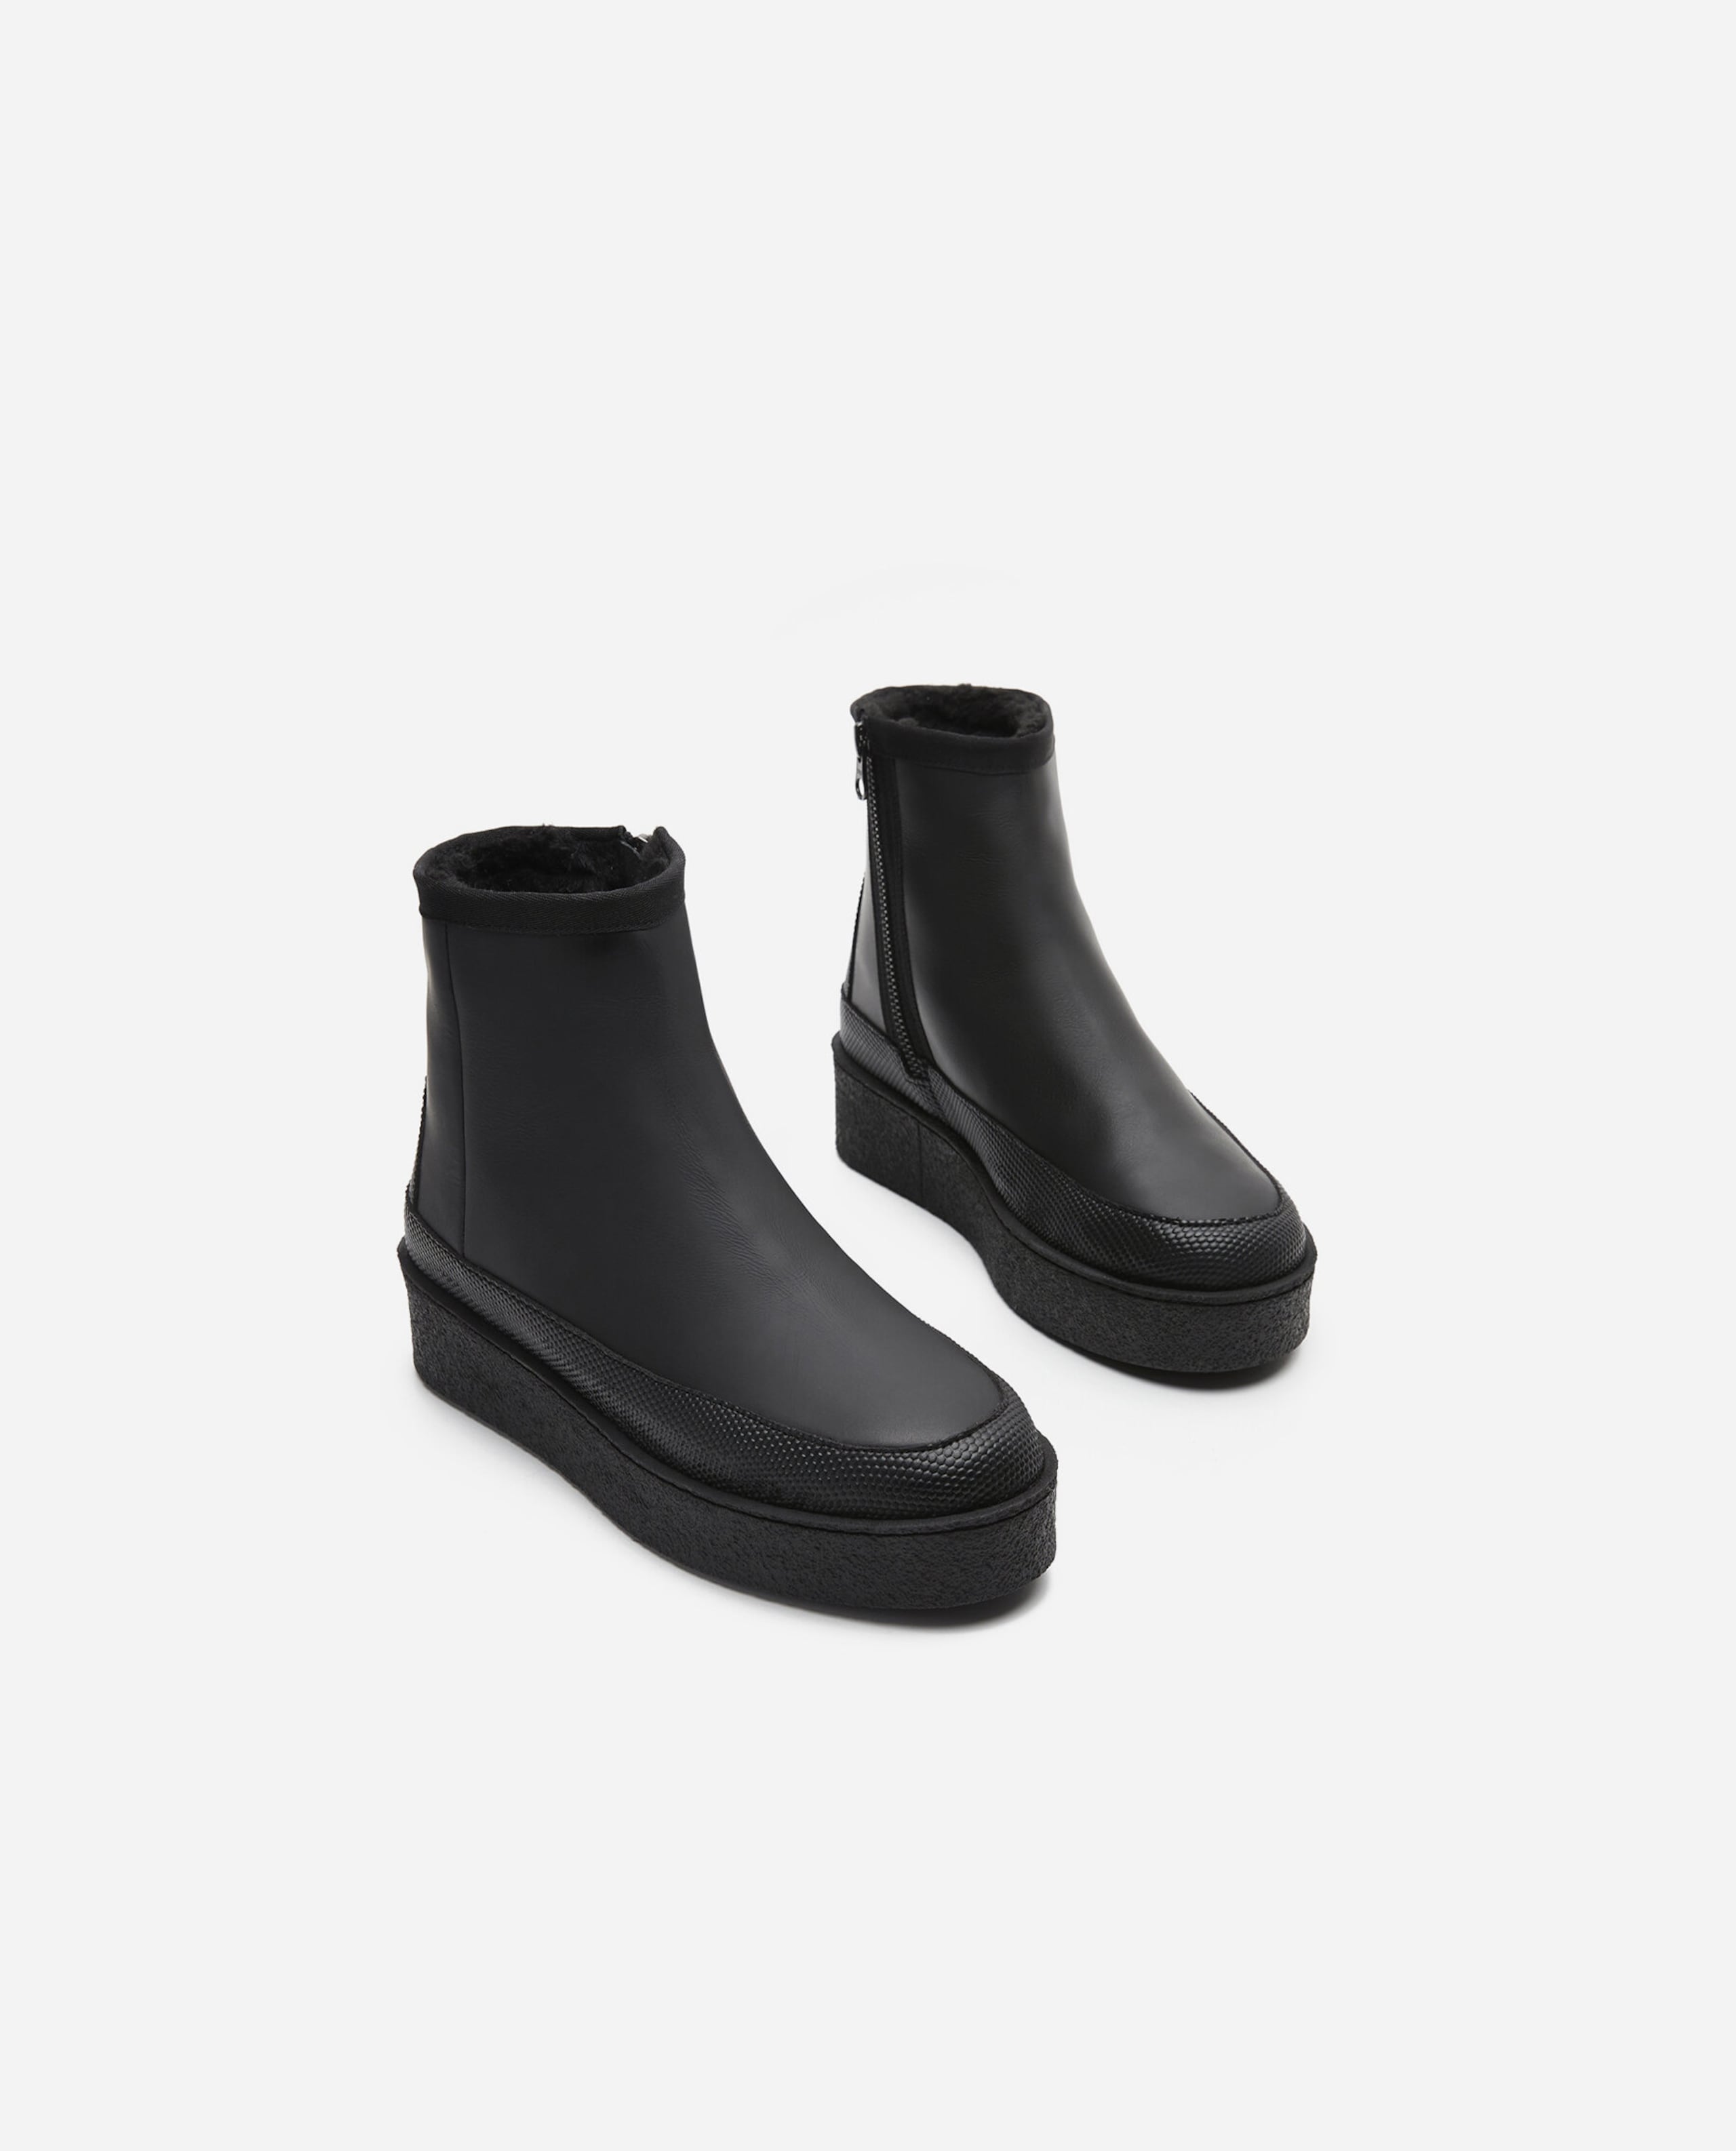 Aria Coated Leather Black Chelsea Boots 1020919126-014 - 04